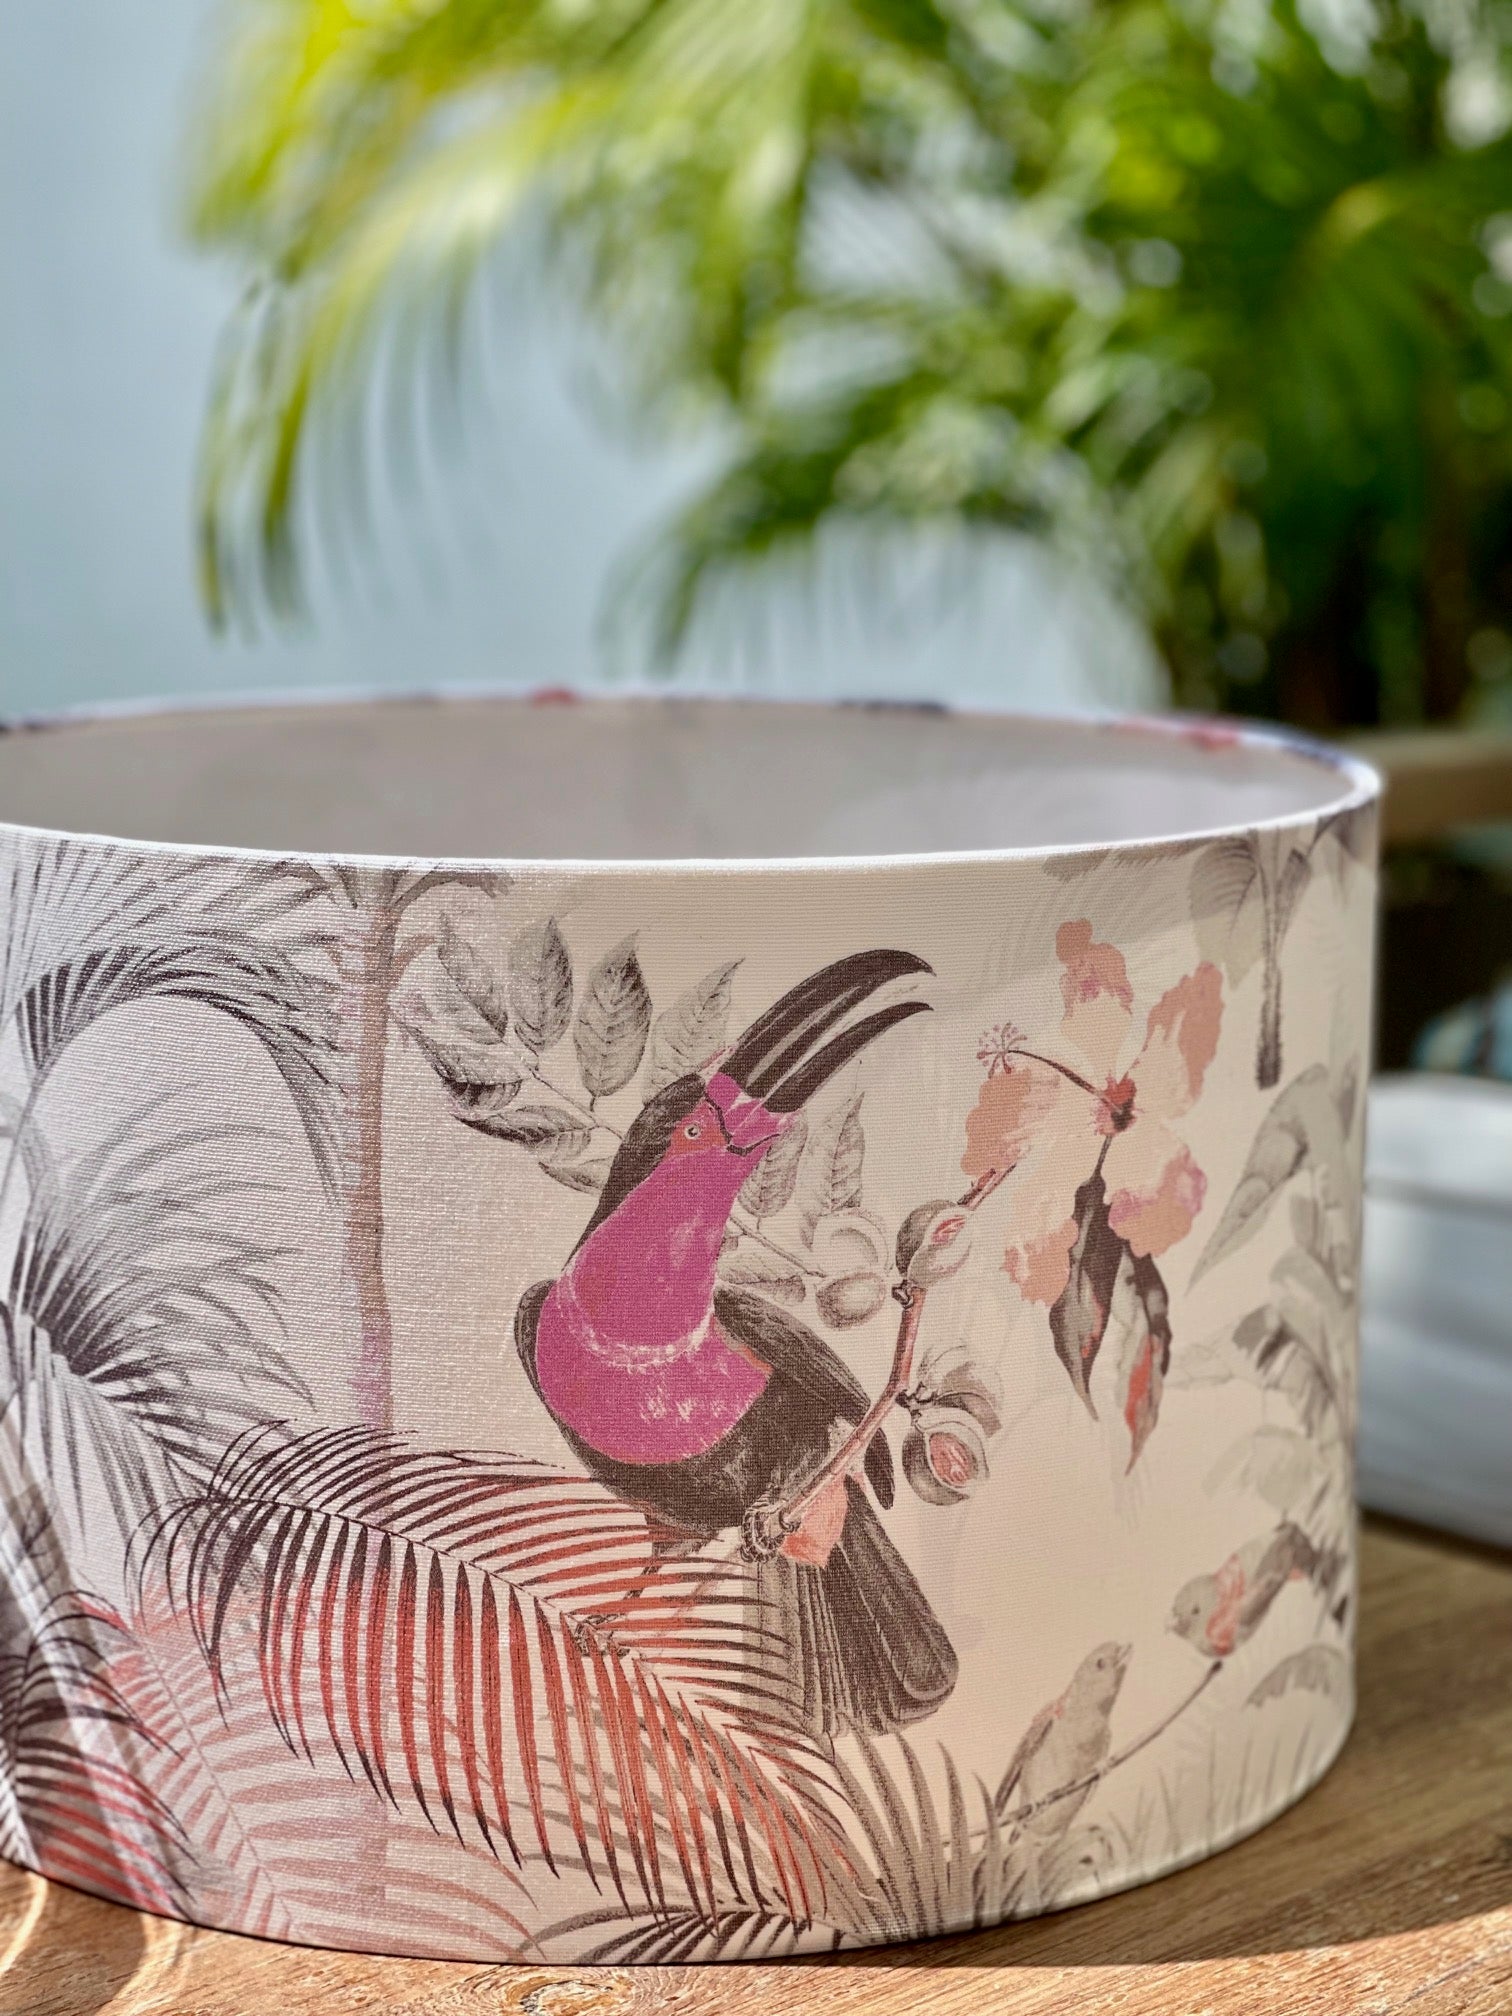 Handmade lampshades Singapore with pink bird and tropical plants